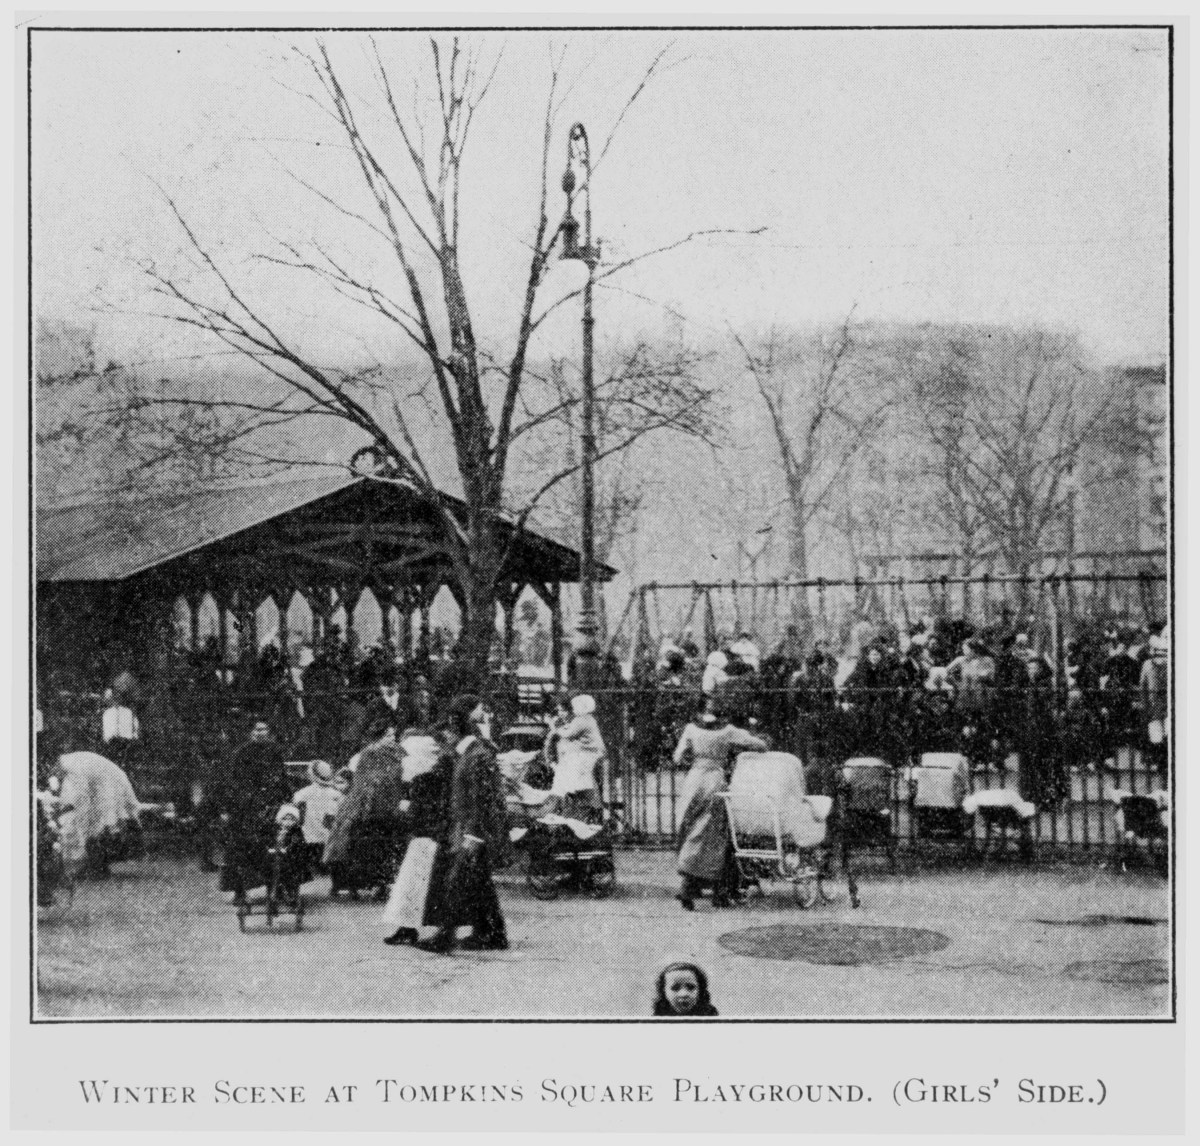 ANR999_ca 1911_Winter scene at Tompkins Square Park playground, girls’ side